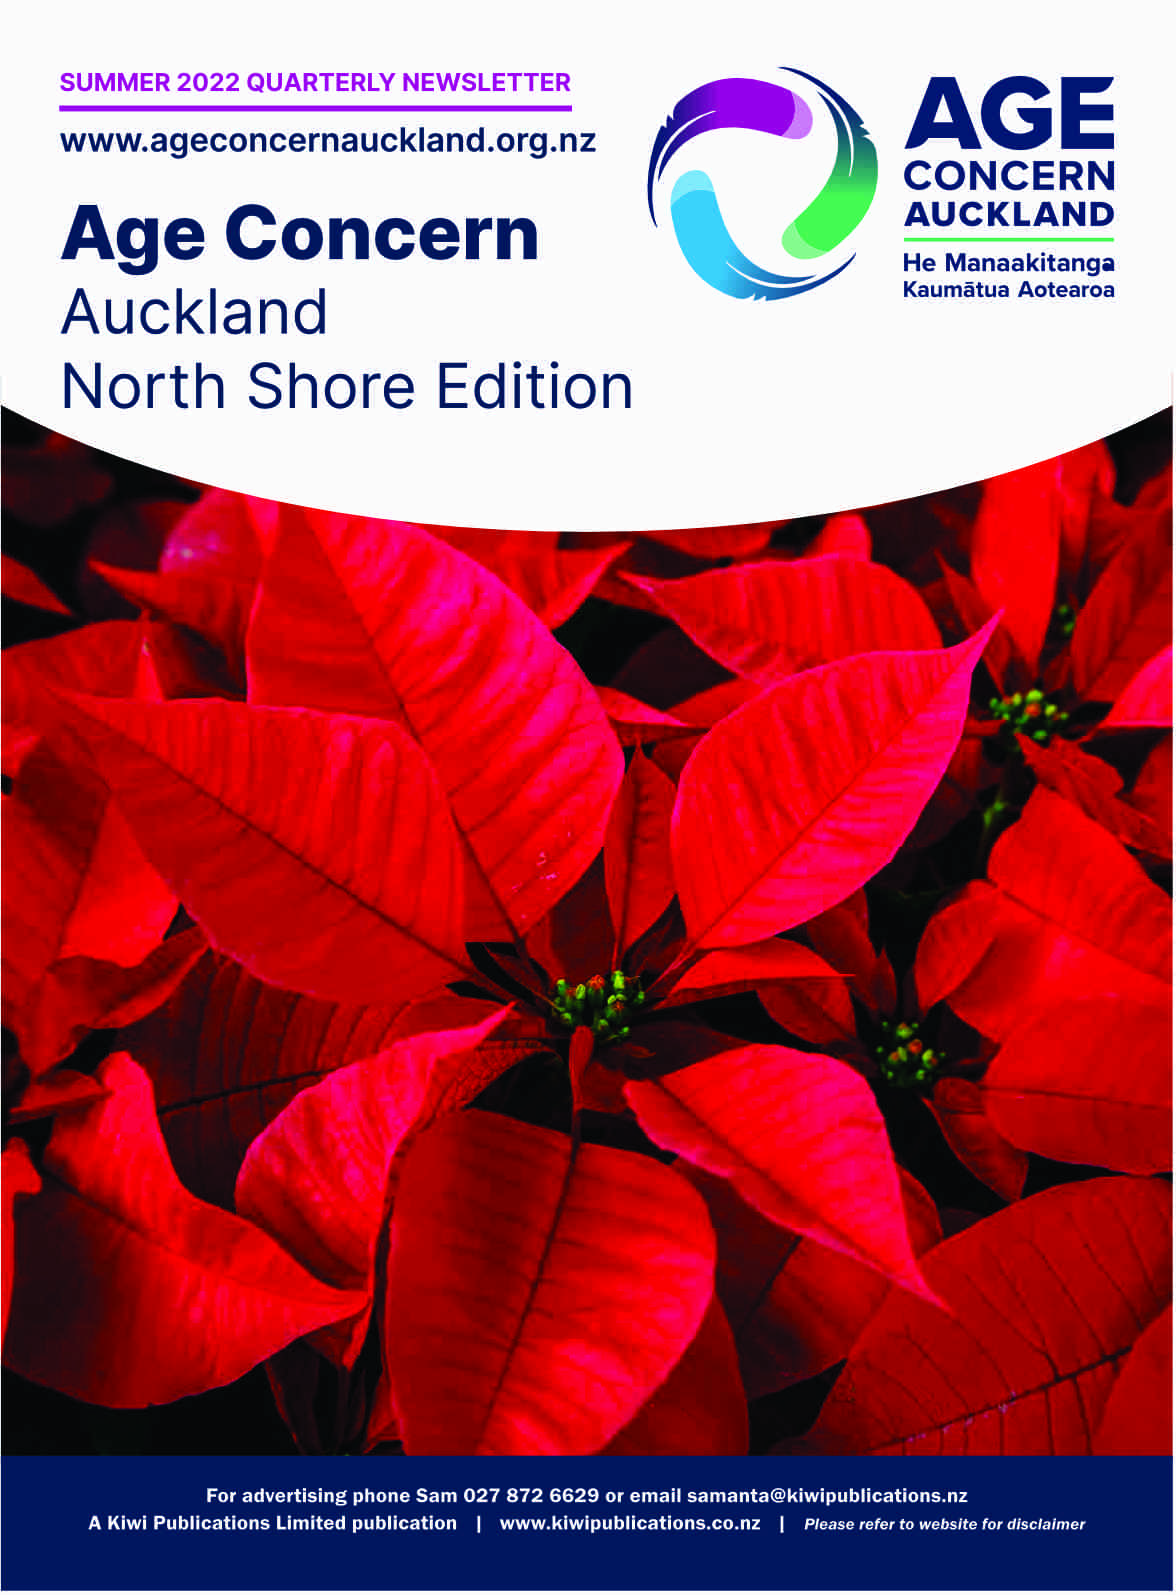 Issue 4 2022 Summer - Age Concern Auckland North Shore